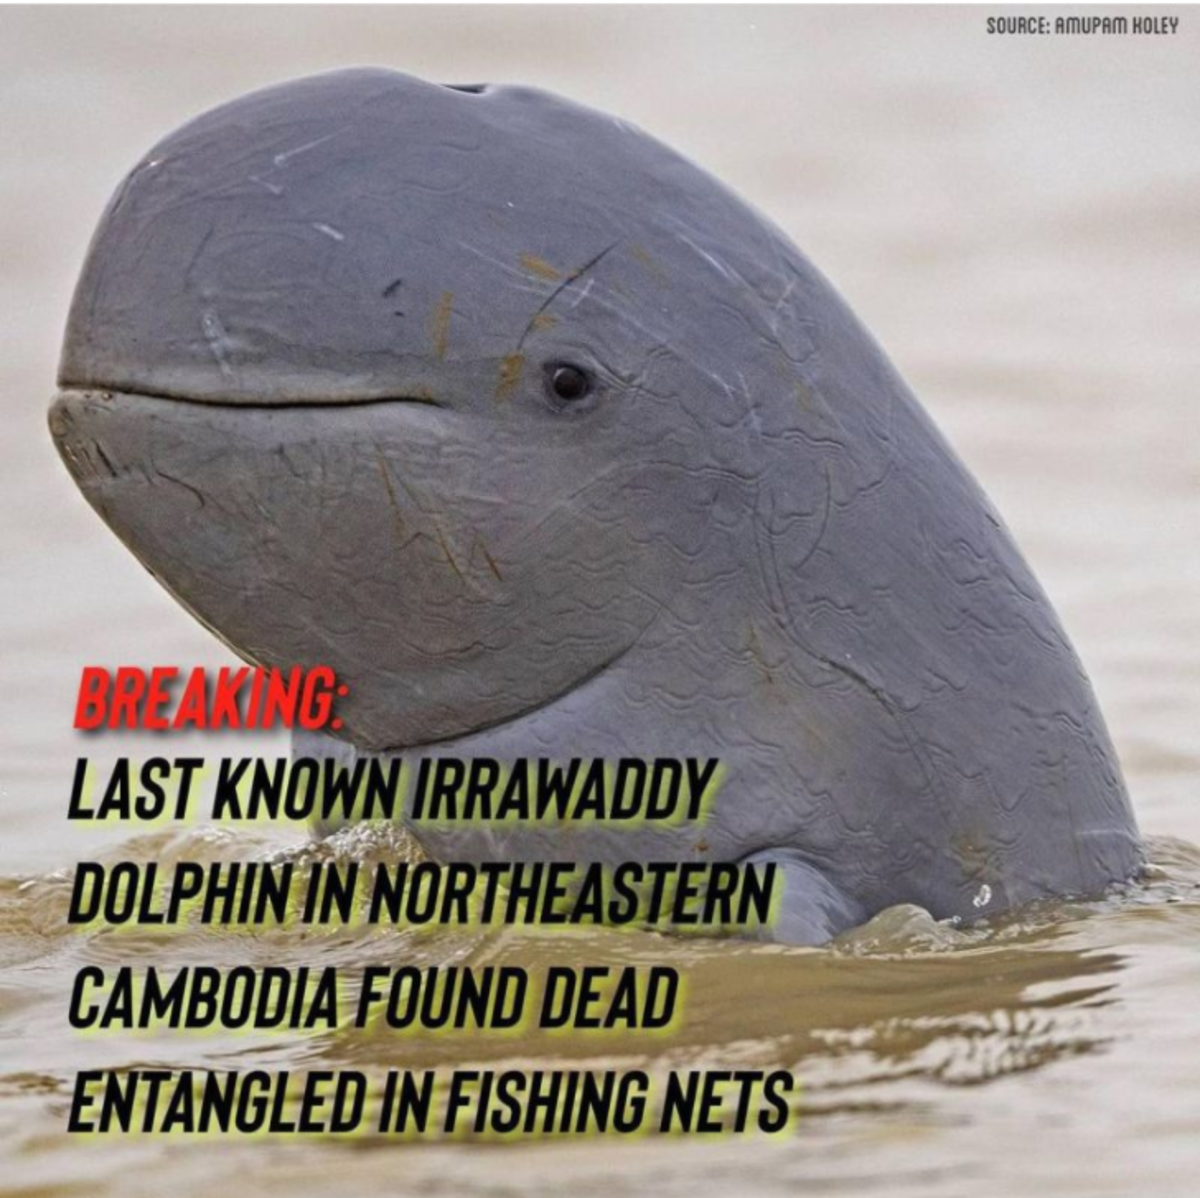 The last remaining Irrawaddy dolphin in the Chheuteal Pool of Stung Treng province was found dead on February 15 2022